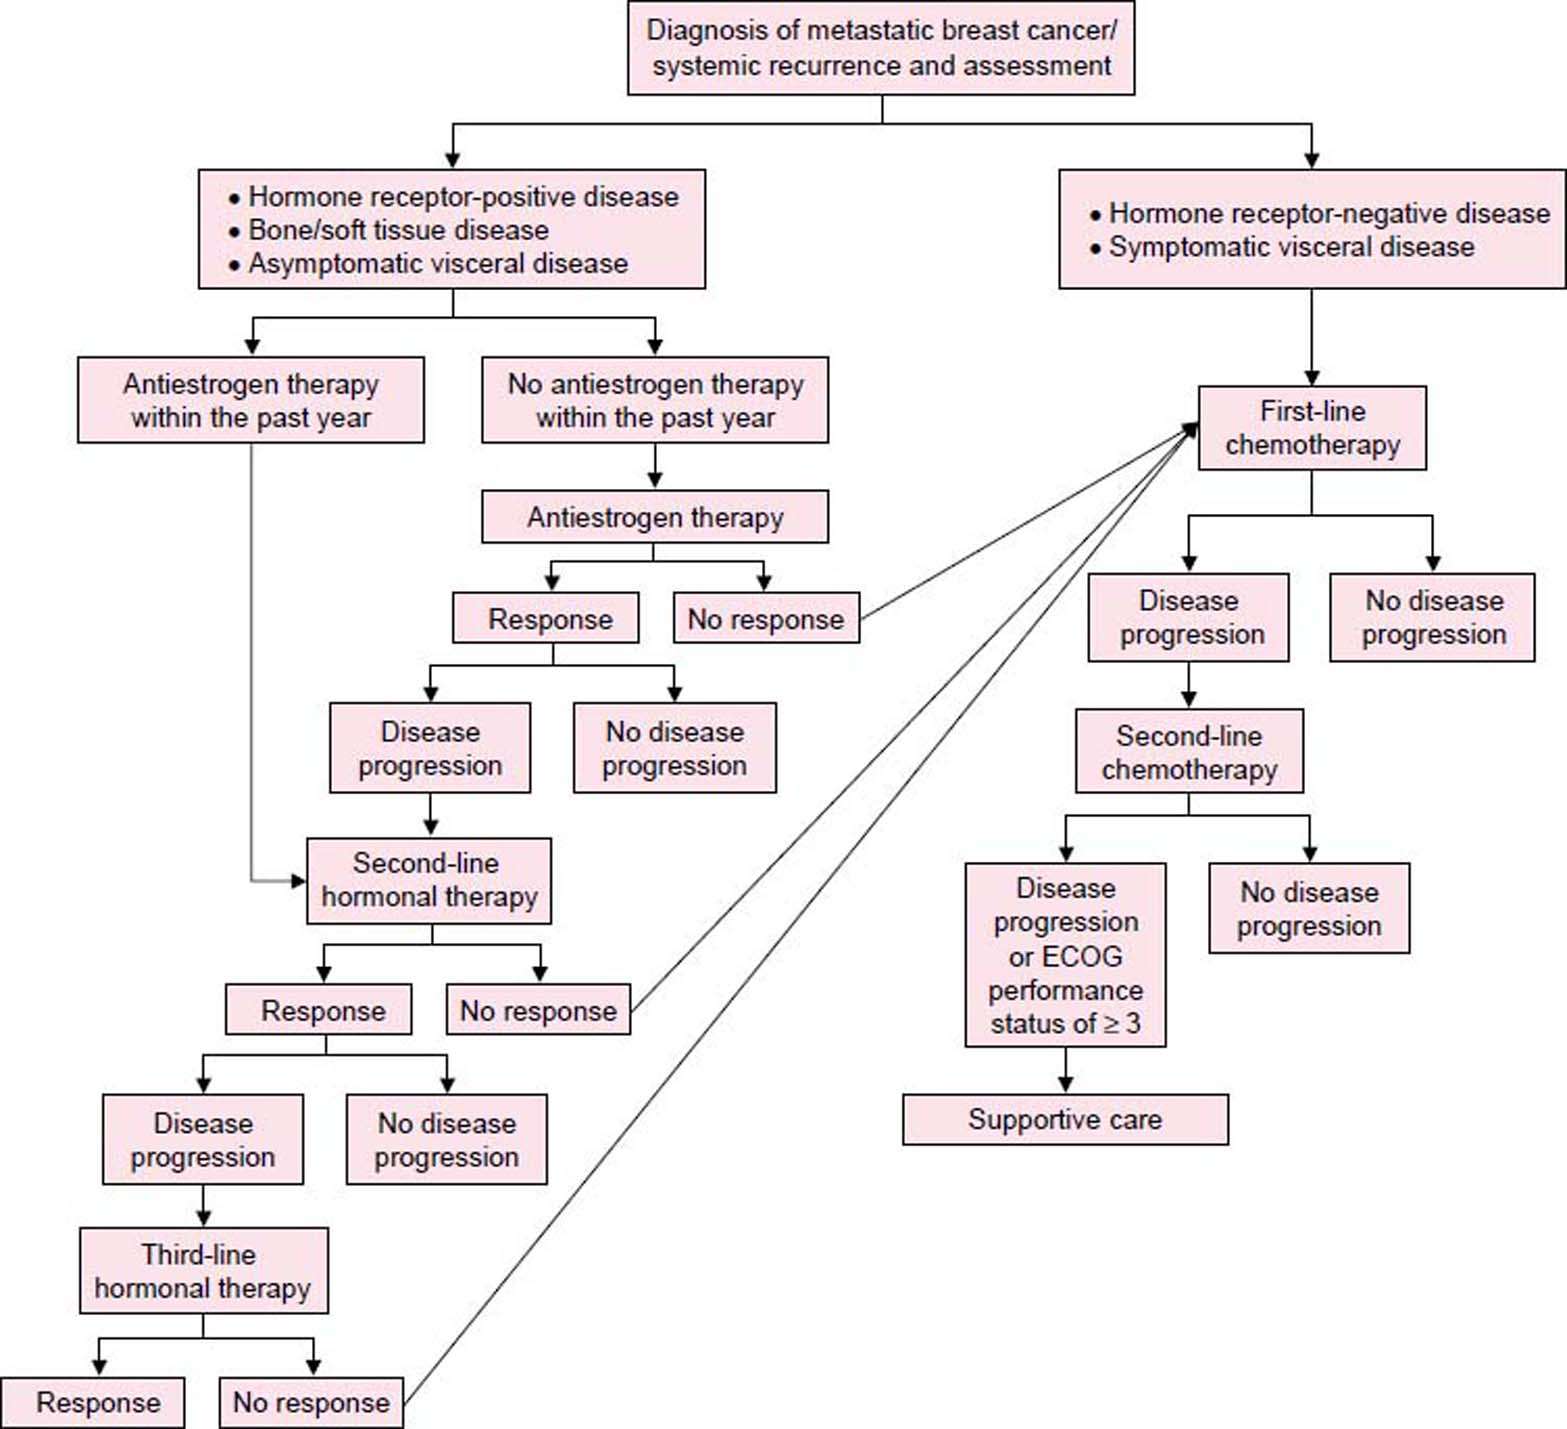 Management of Advanced Breast Cancer